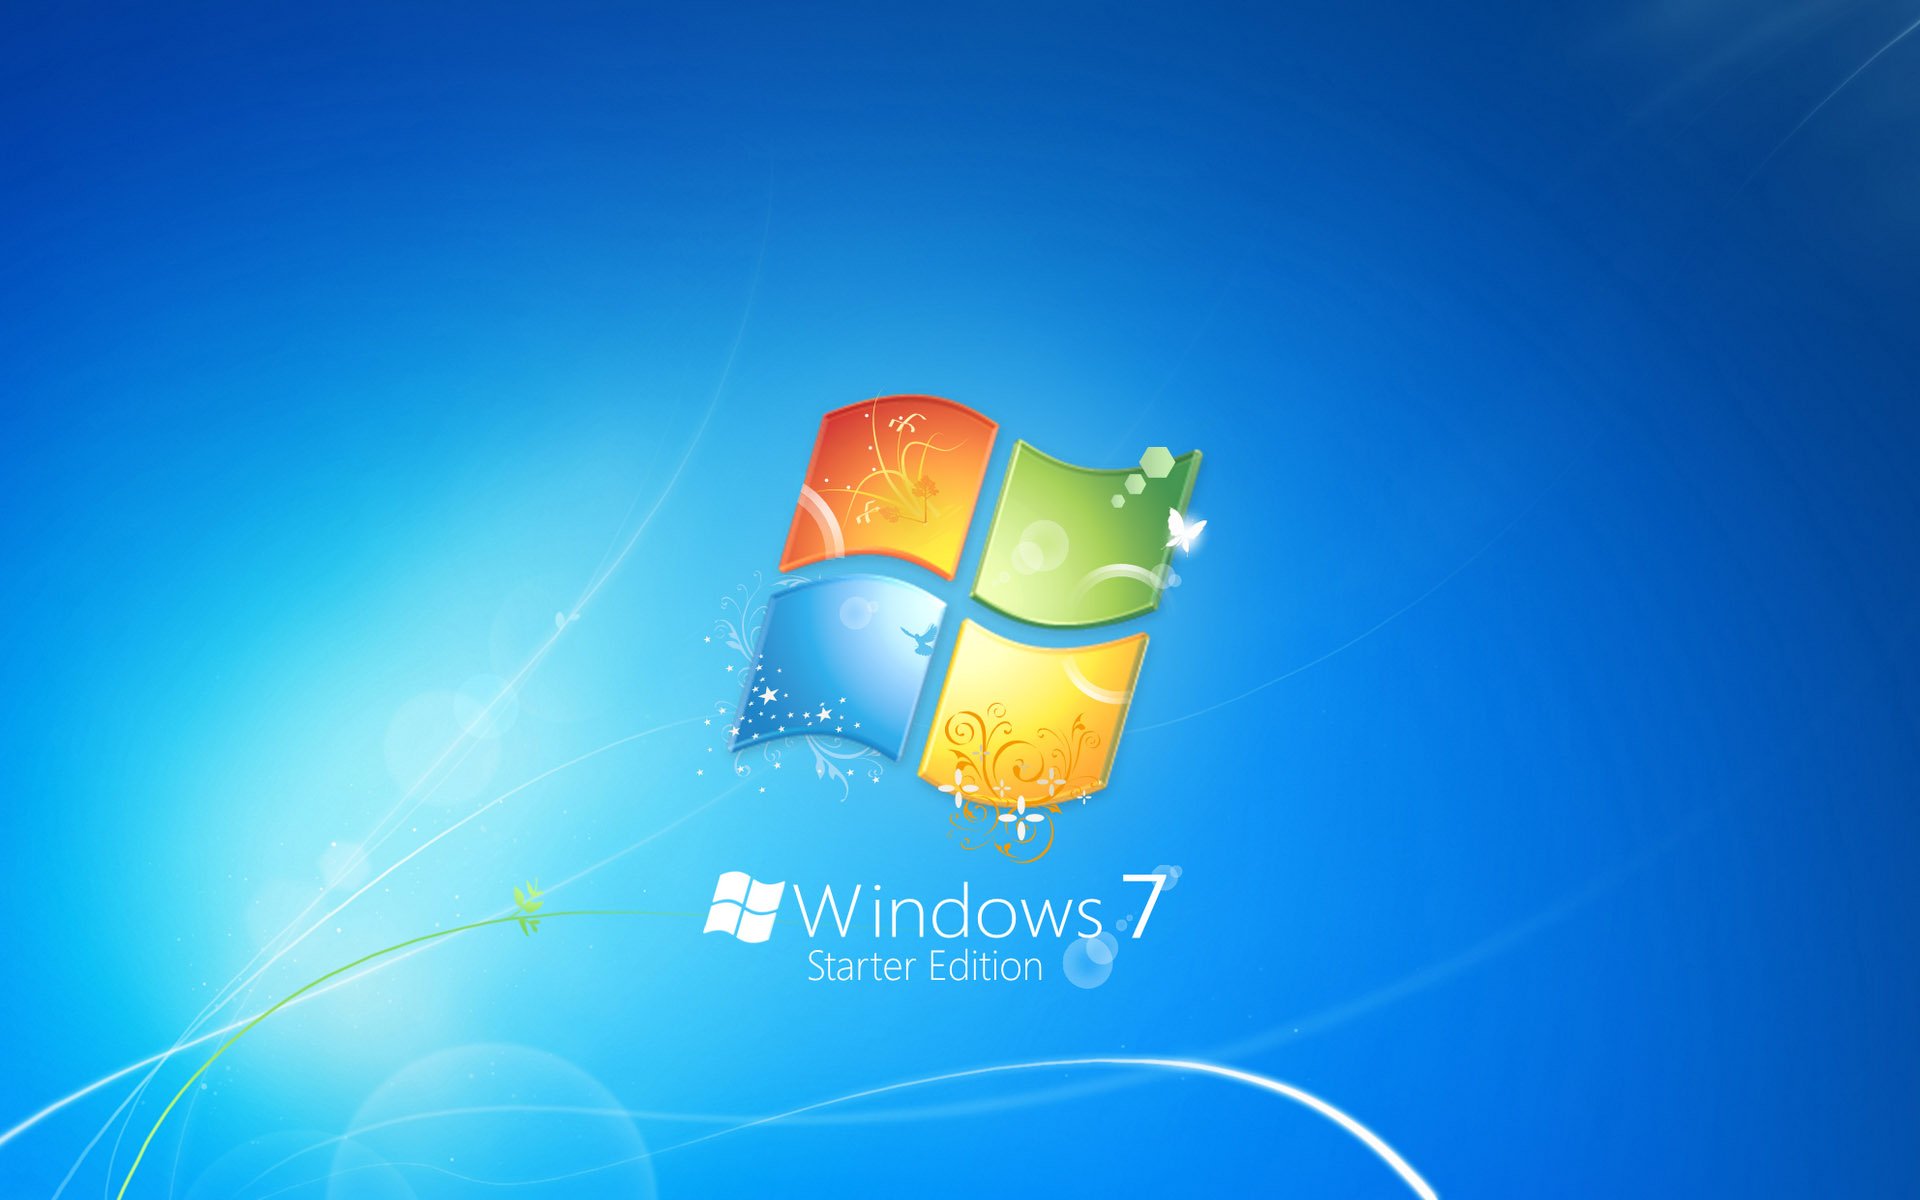 Windows 7 Starter Edition Wallpapers HD Wallpapers